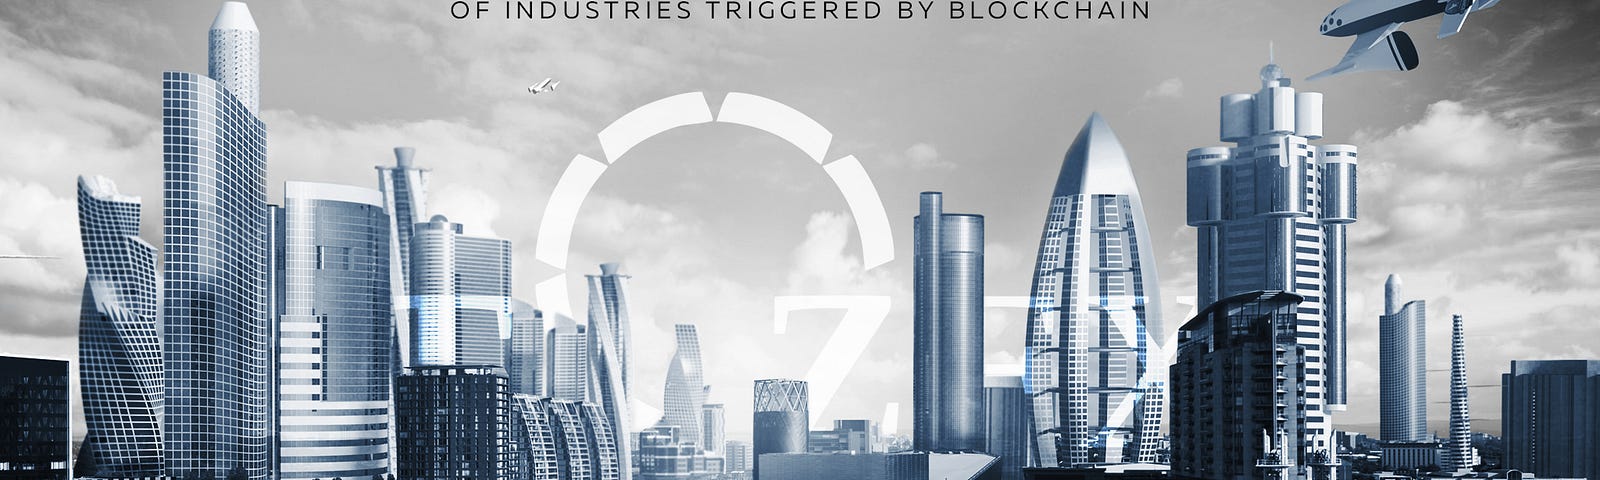 Revolutionary Changes in a Range of Industries Triggered by Blockchain